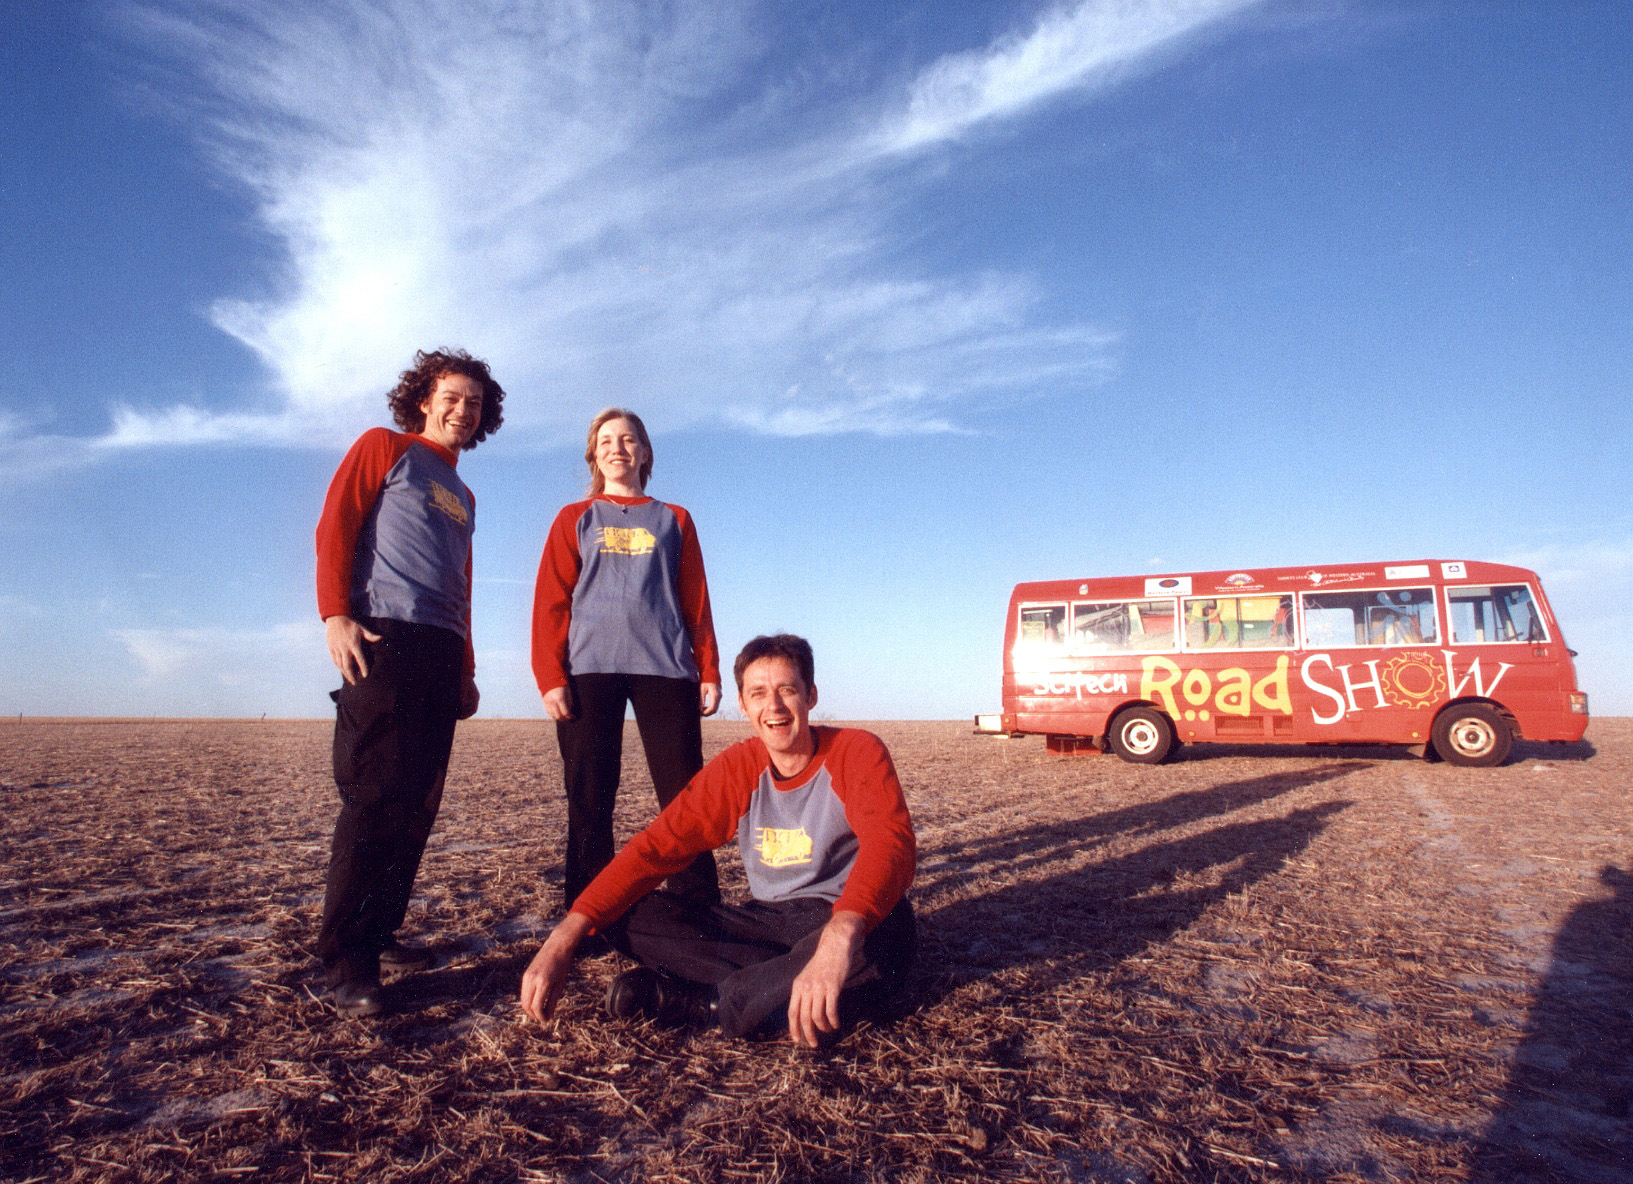 Two scitech staff stand, while a third sits on the ground in a dusty field, with the red 1996 Scitech Road Show Bus in the background The start of Statewide